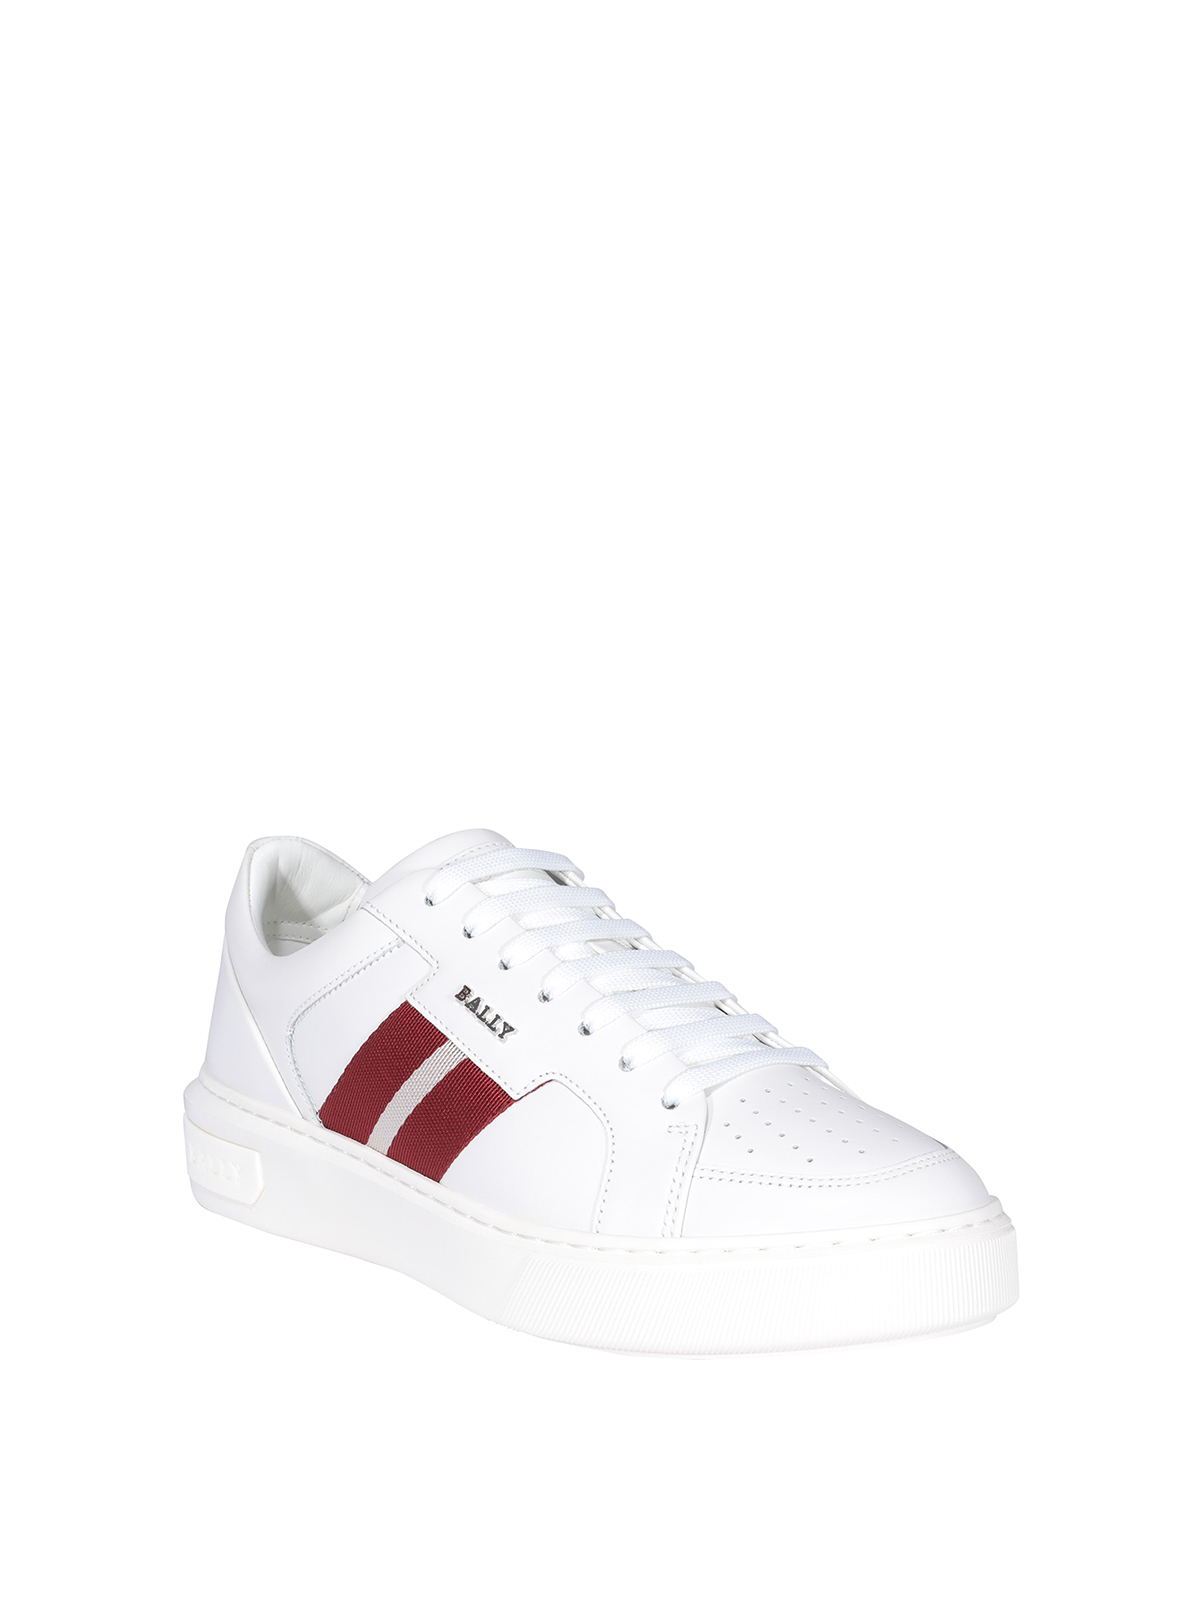 Trainers Bally - Moonyl sneakers - 6236586 | Shop online at iKRIX